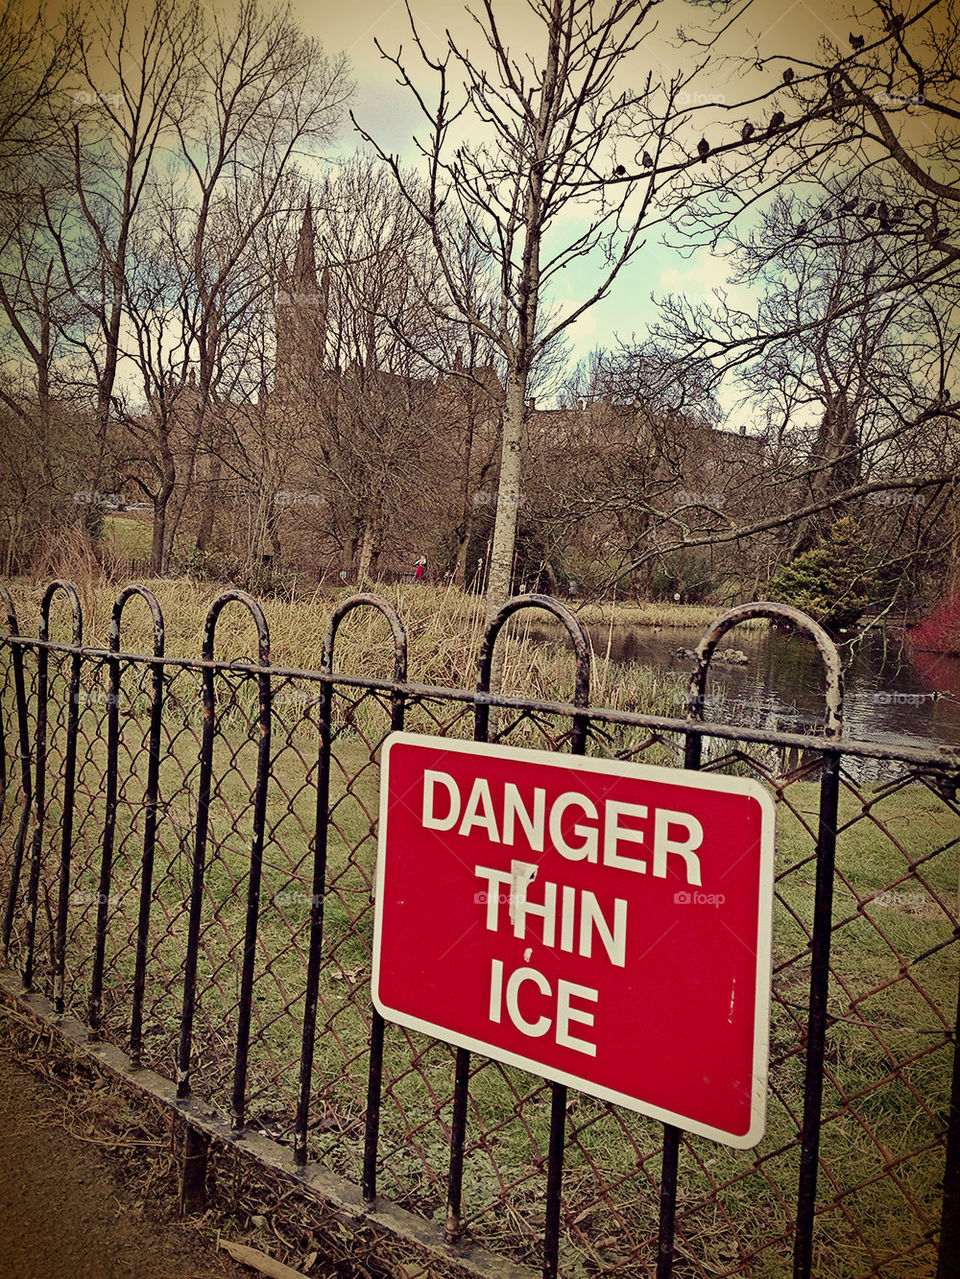 Danger thin ice warning signboard in a park